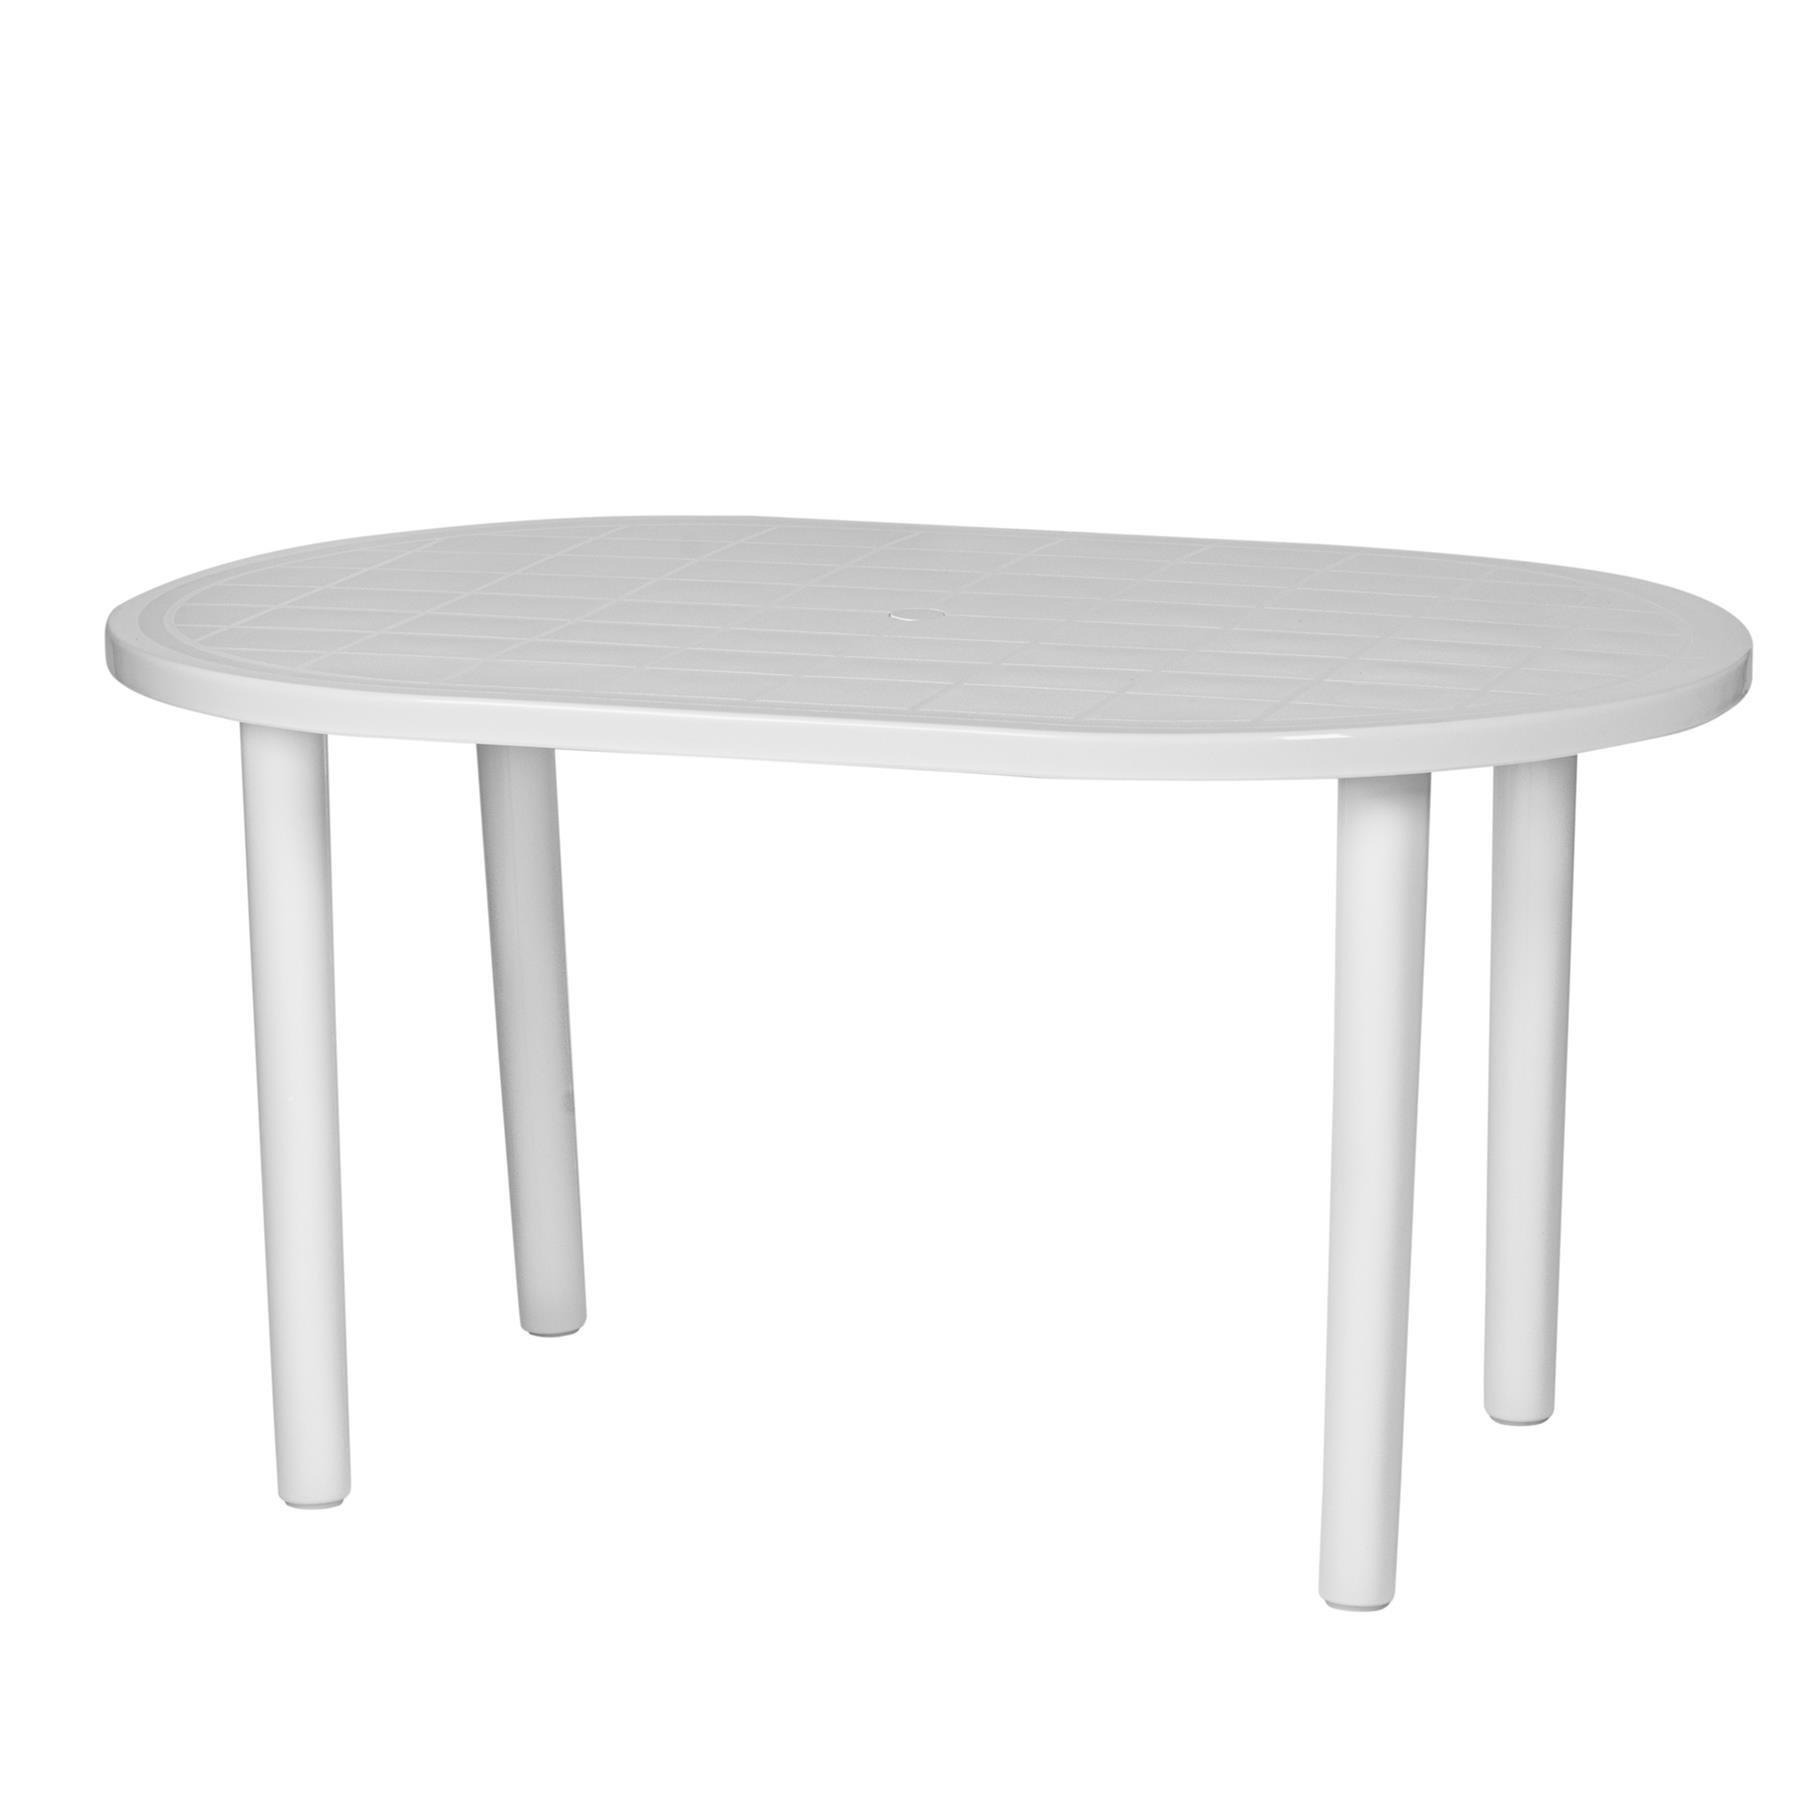 Gala 4 Seater Garden Dining Table - image 1